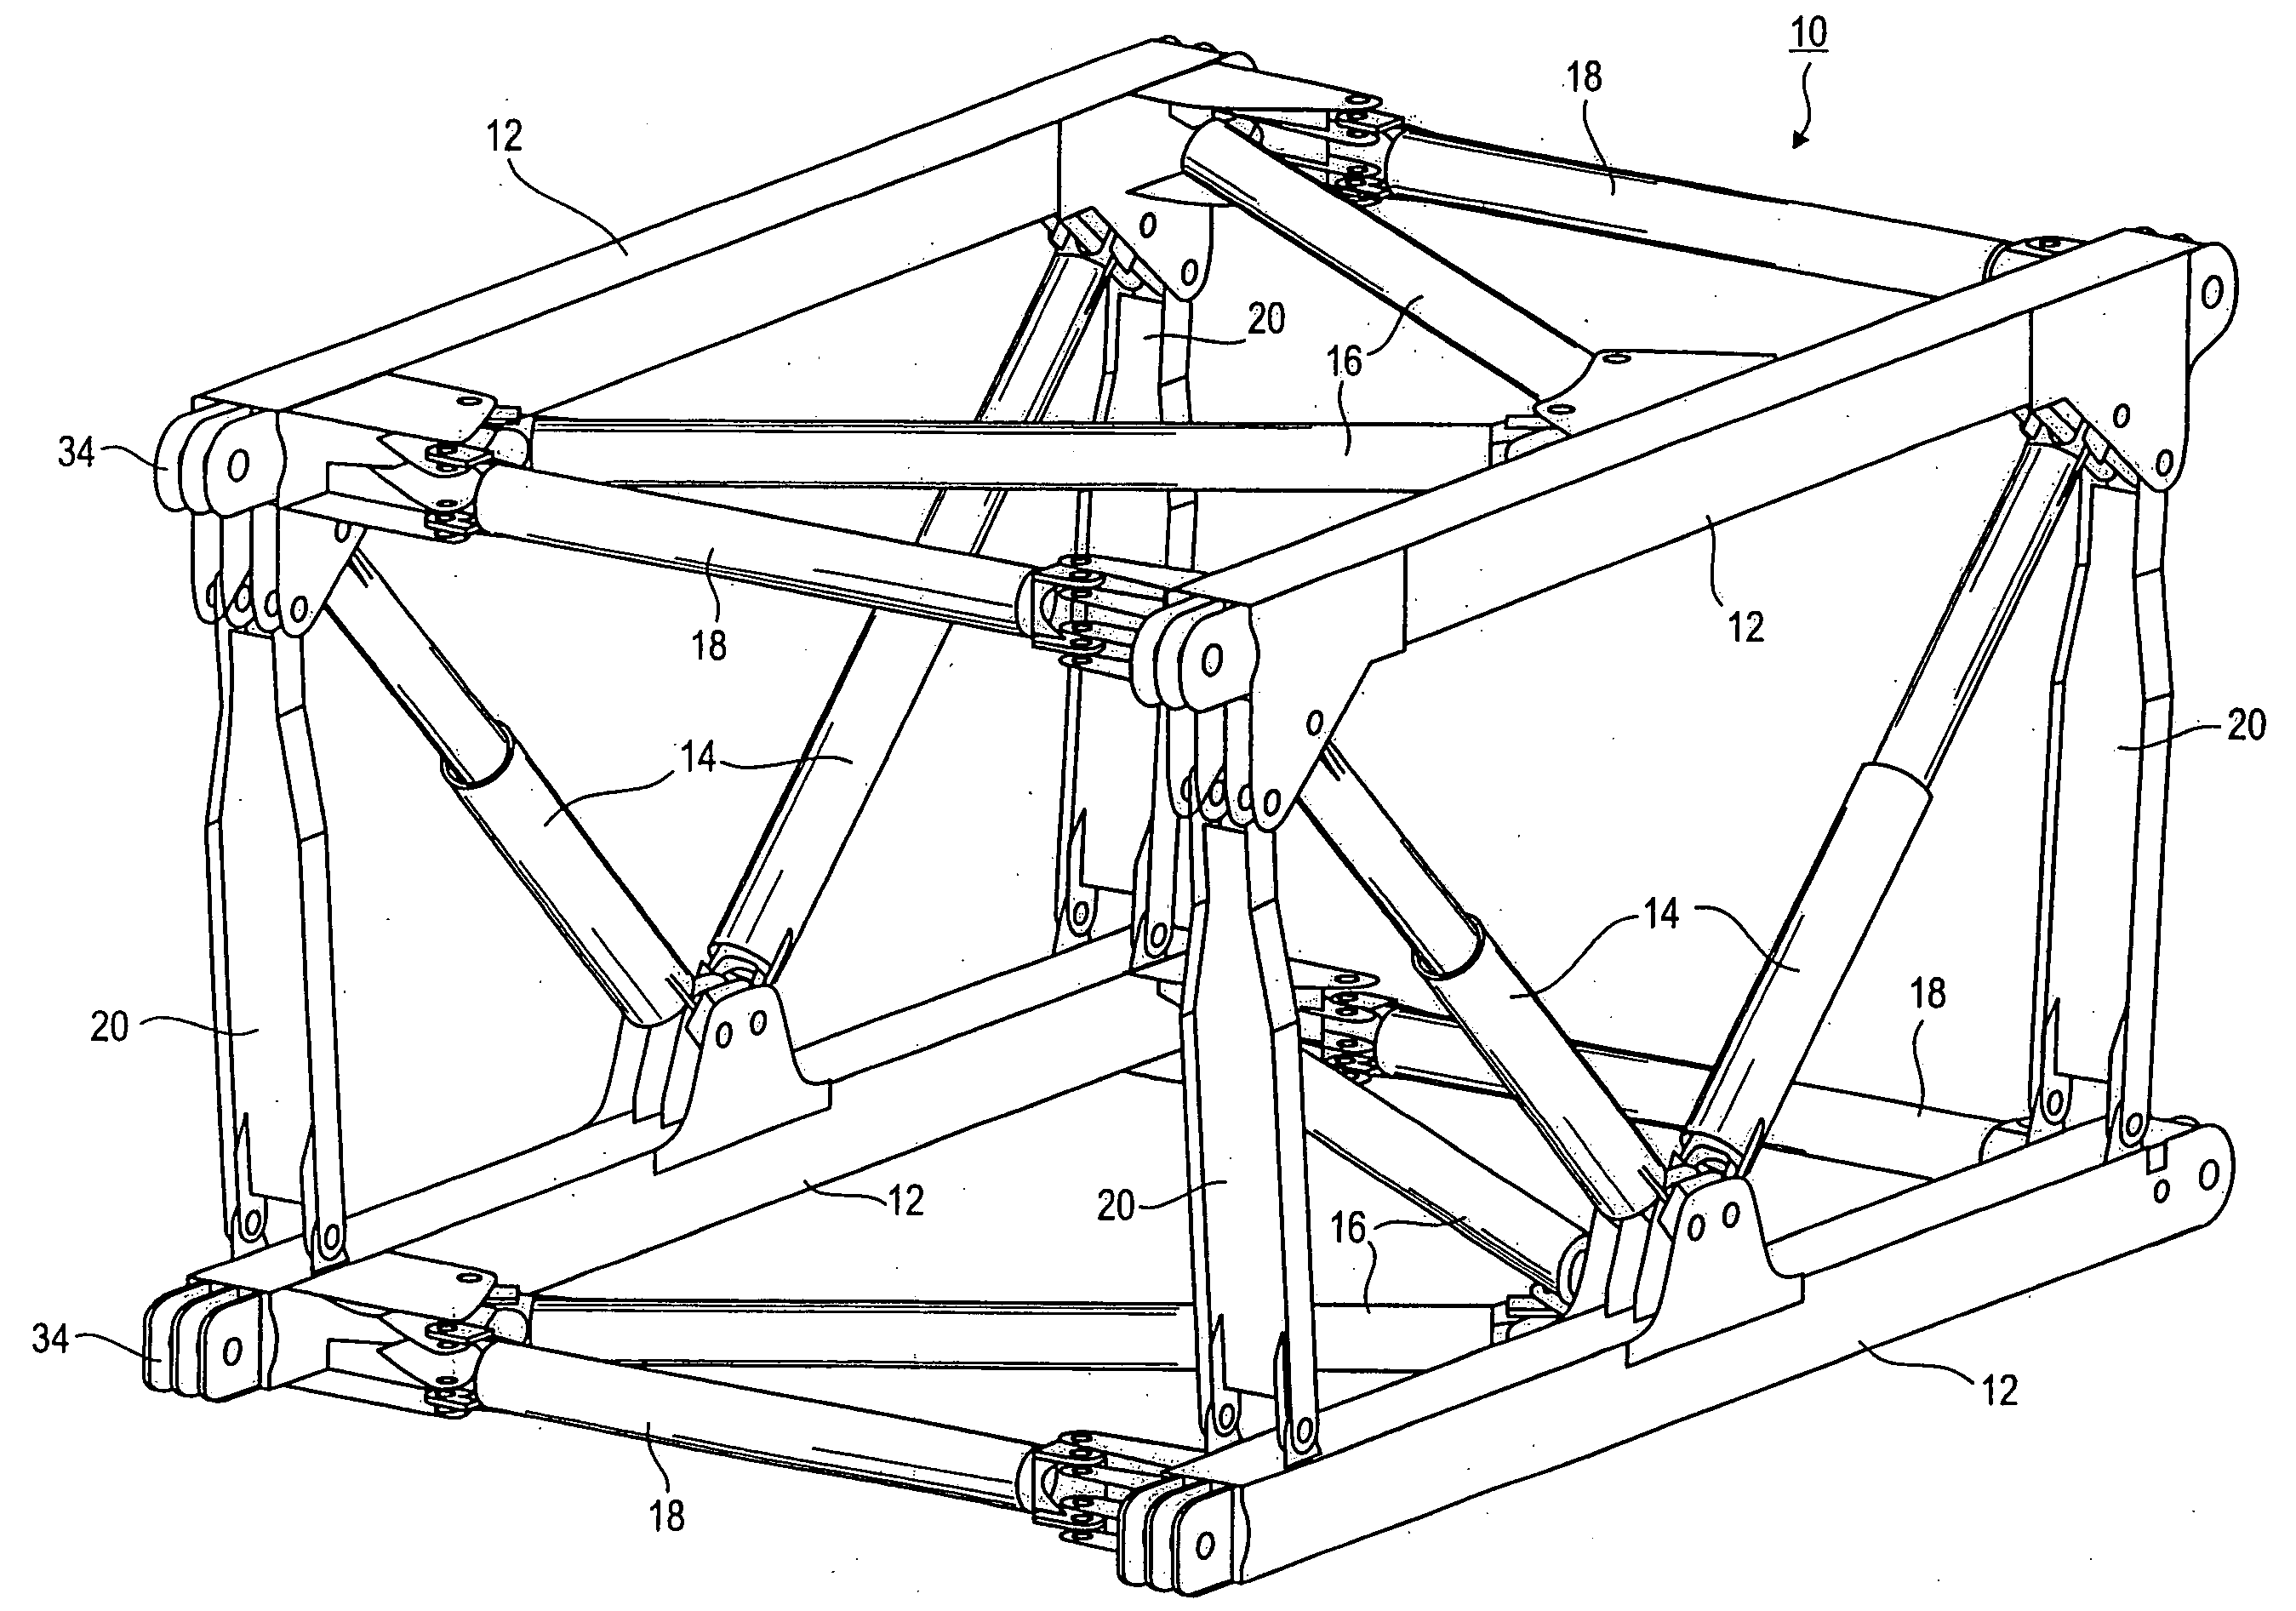 Lattice piece for a large mobile crane and method of erecting the same